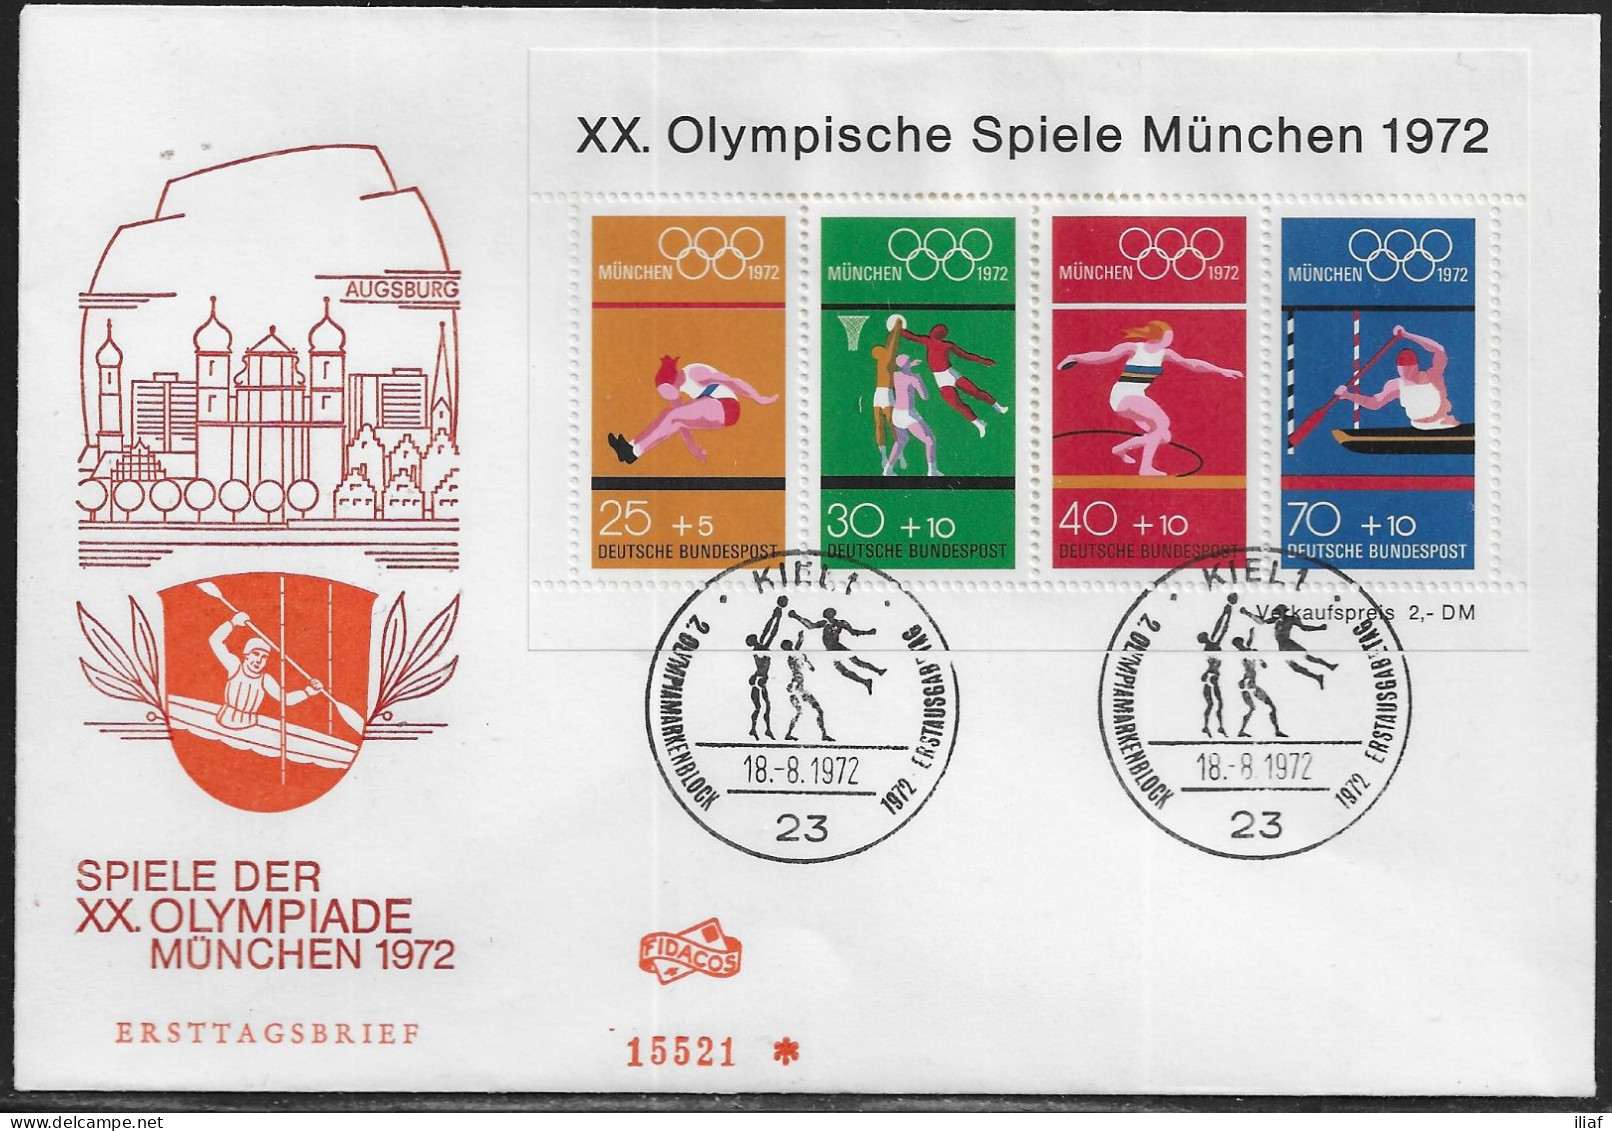 Germany. FDC Mi. BL8.  Summer Olympic Games 1972 - Munich.  Souvenir Sheet.  FDC Cancellation On Cachet Special Envelope - 1971-1980